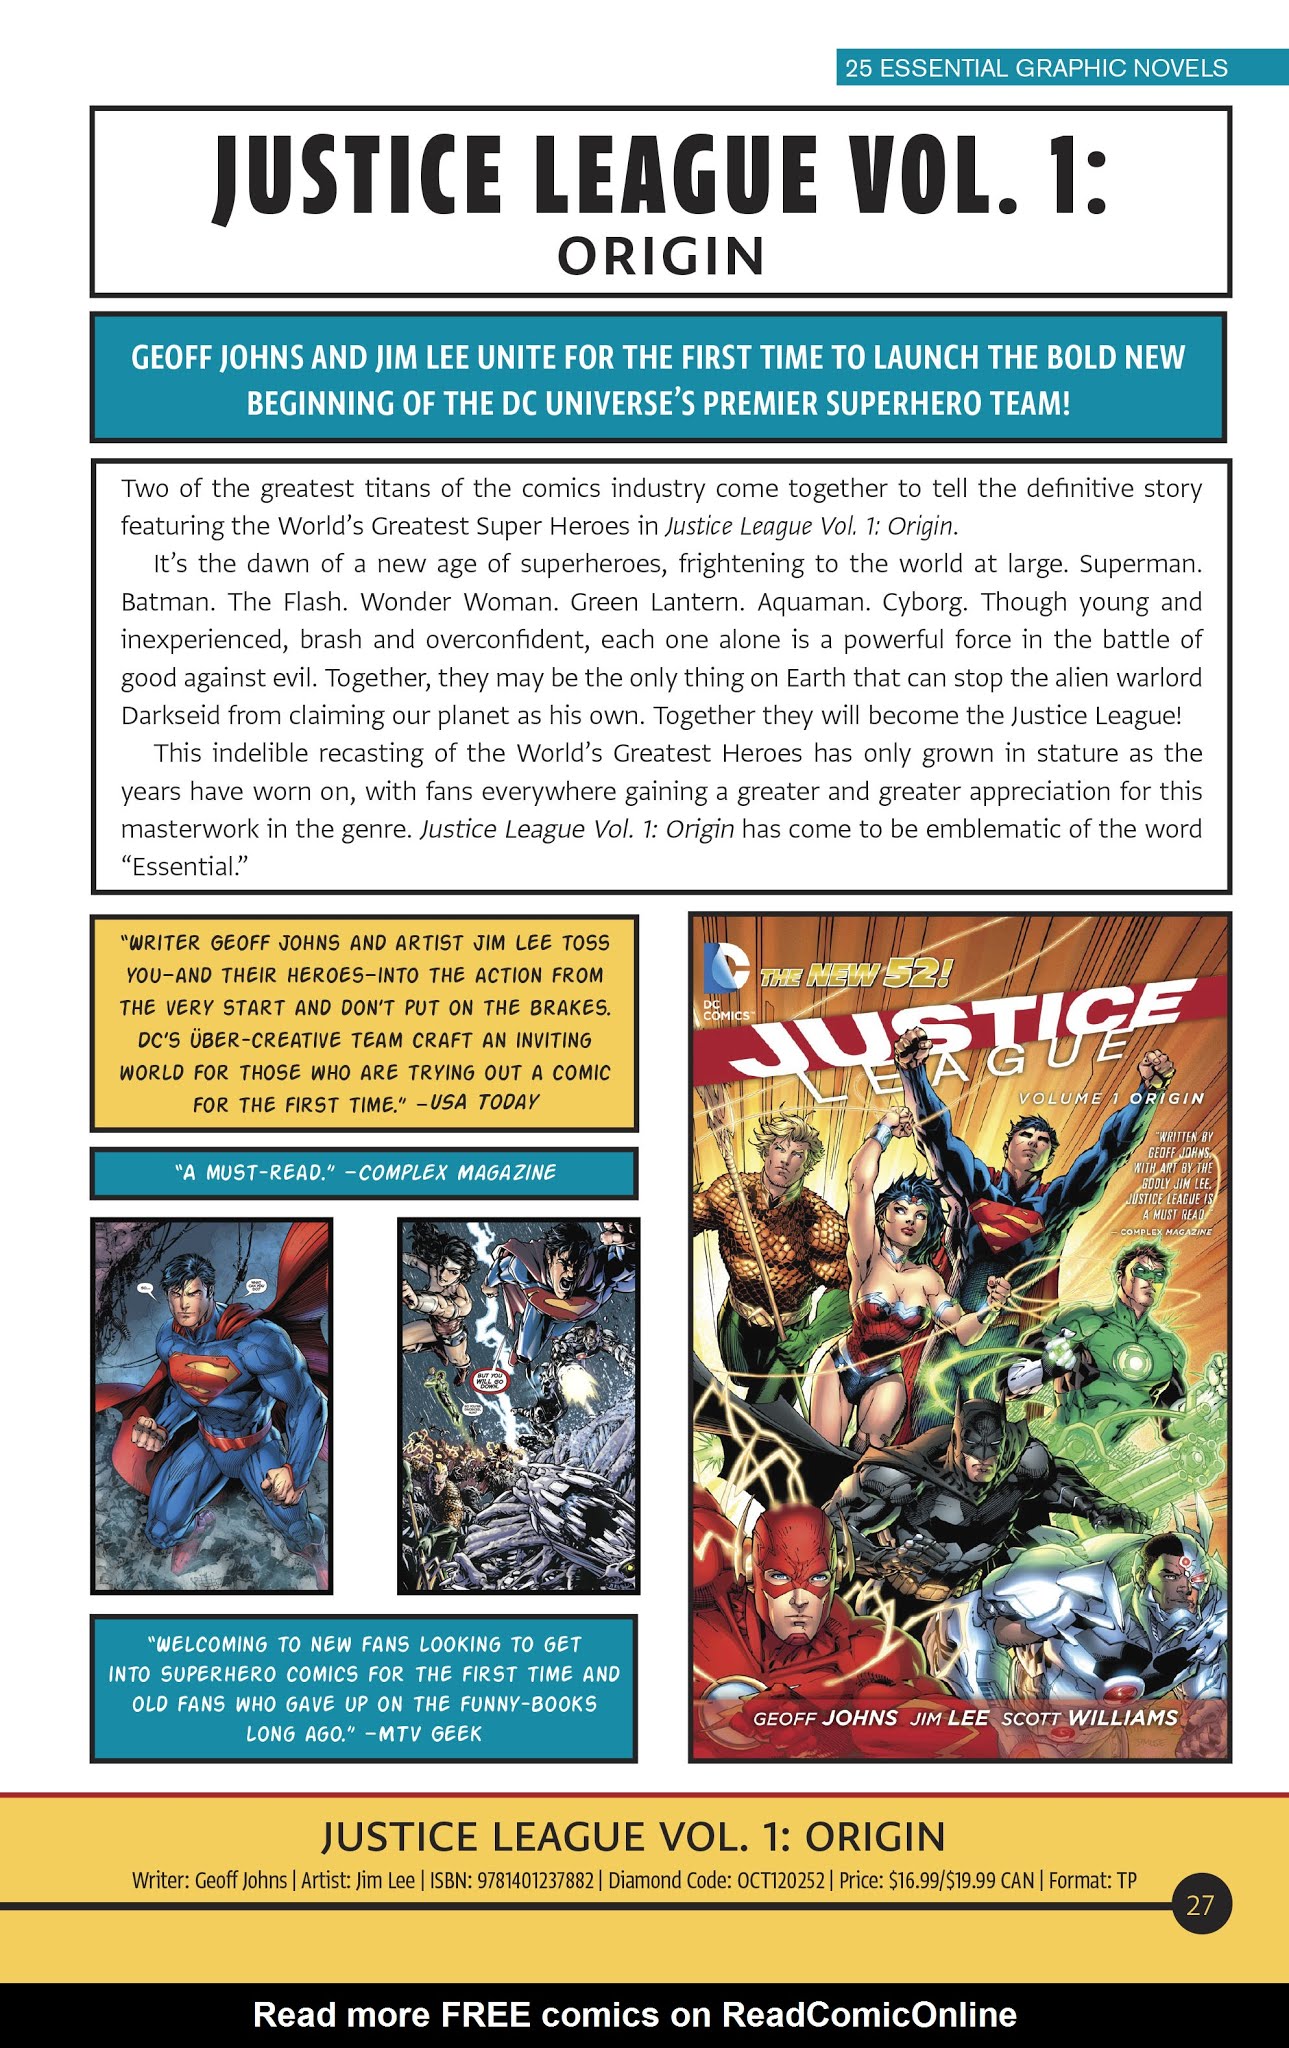 Read online DC Essential Graphic Novels 2019 comic -  Issue # TPB - 28